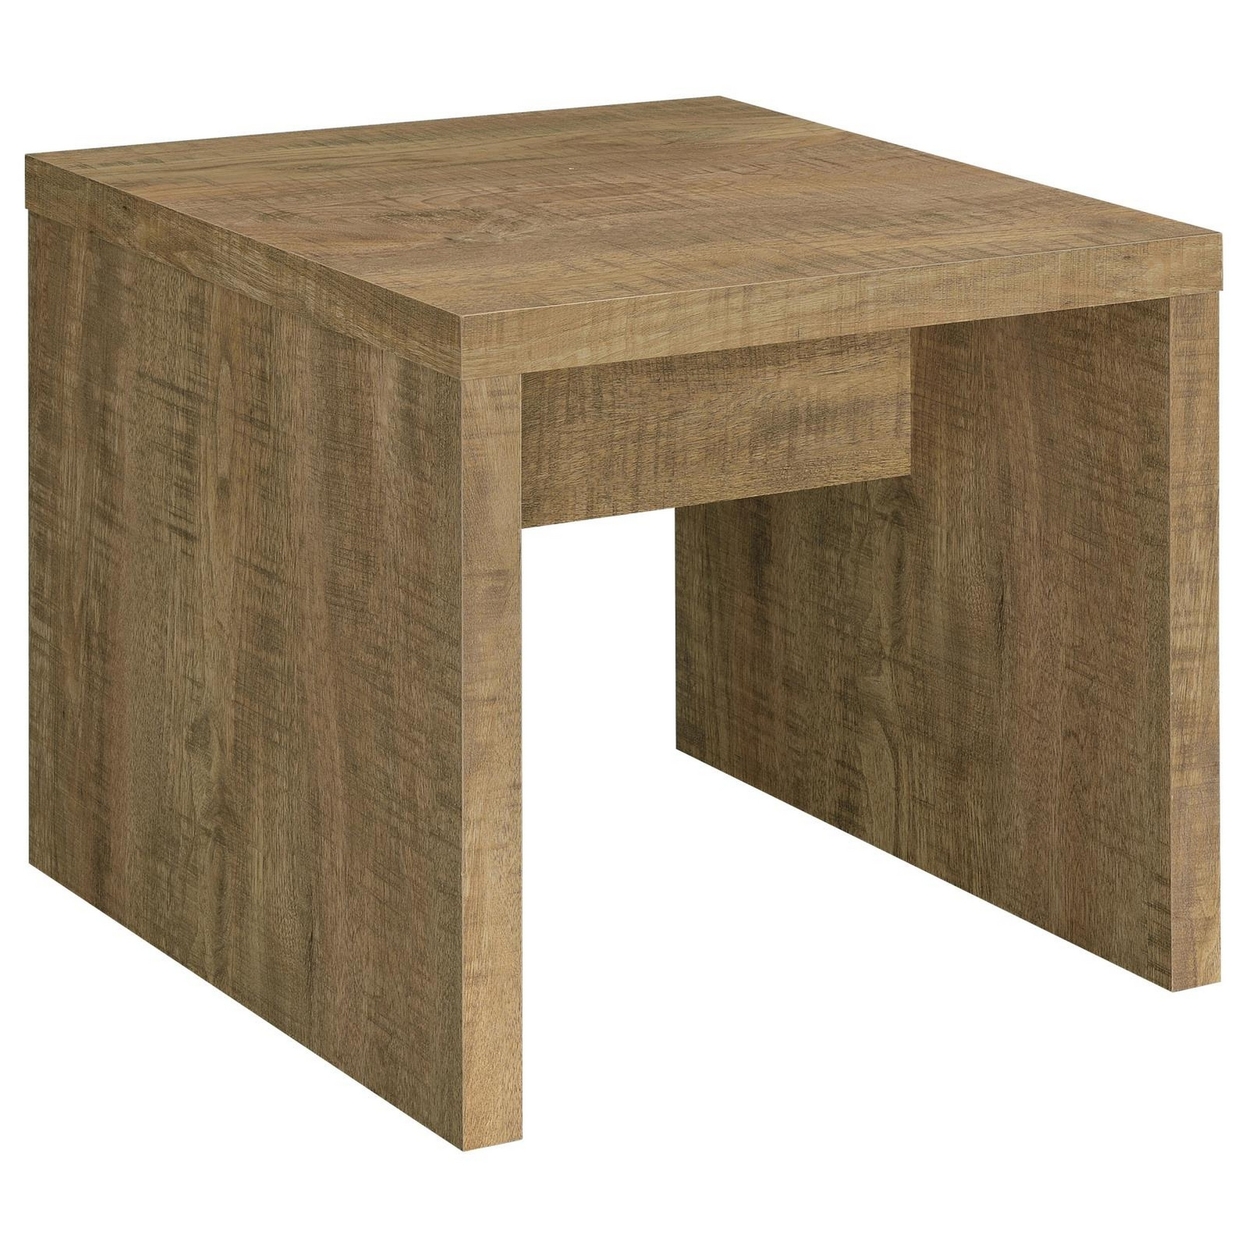 Nette 24 Inch End Table With Rough Hewn Saw Marks, Wood, Natural Brown -Saltoro Sherpi